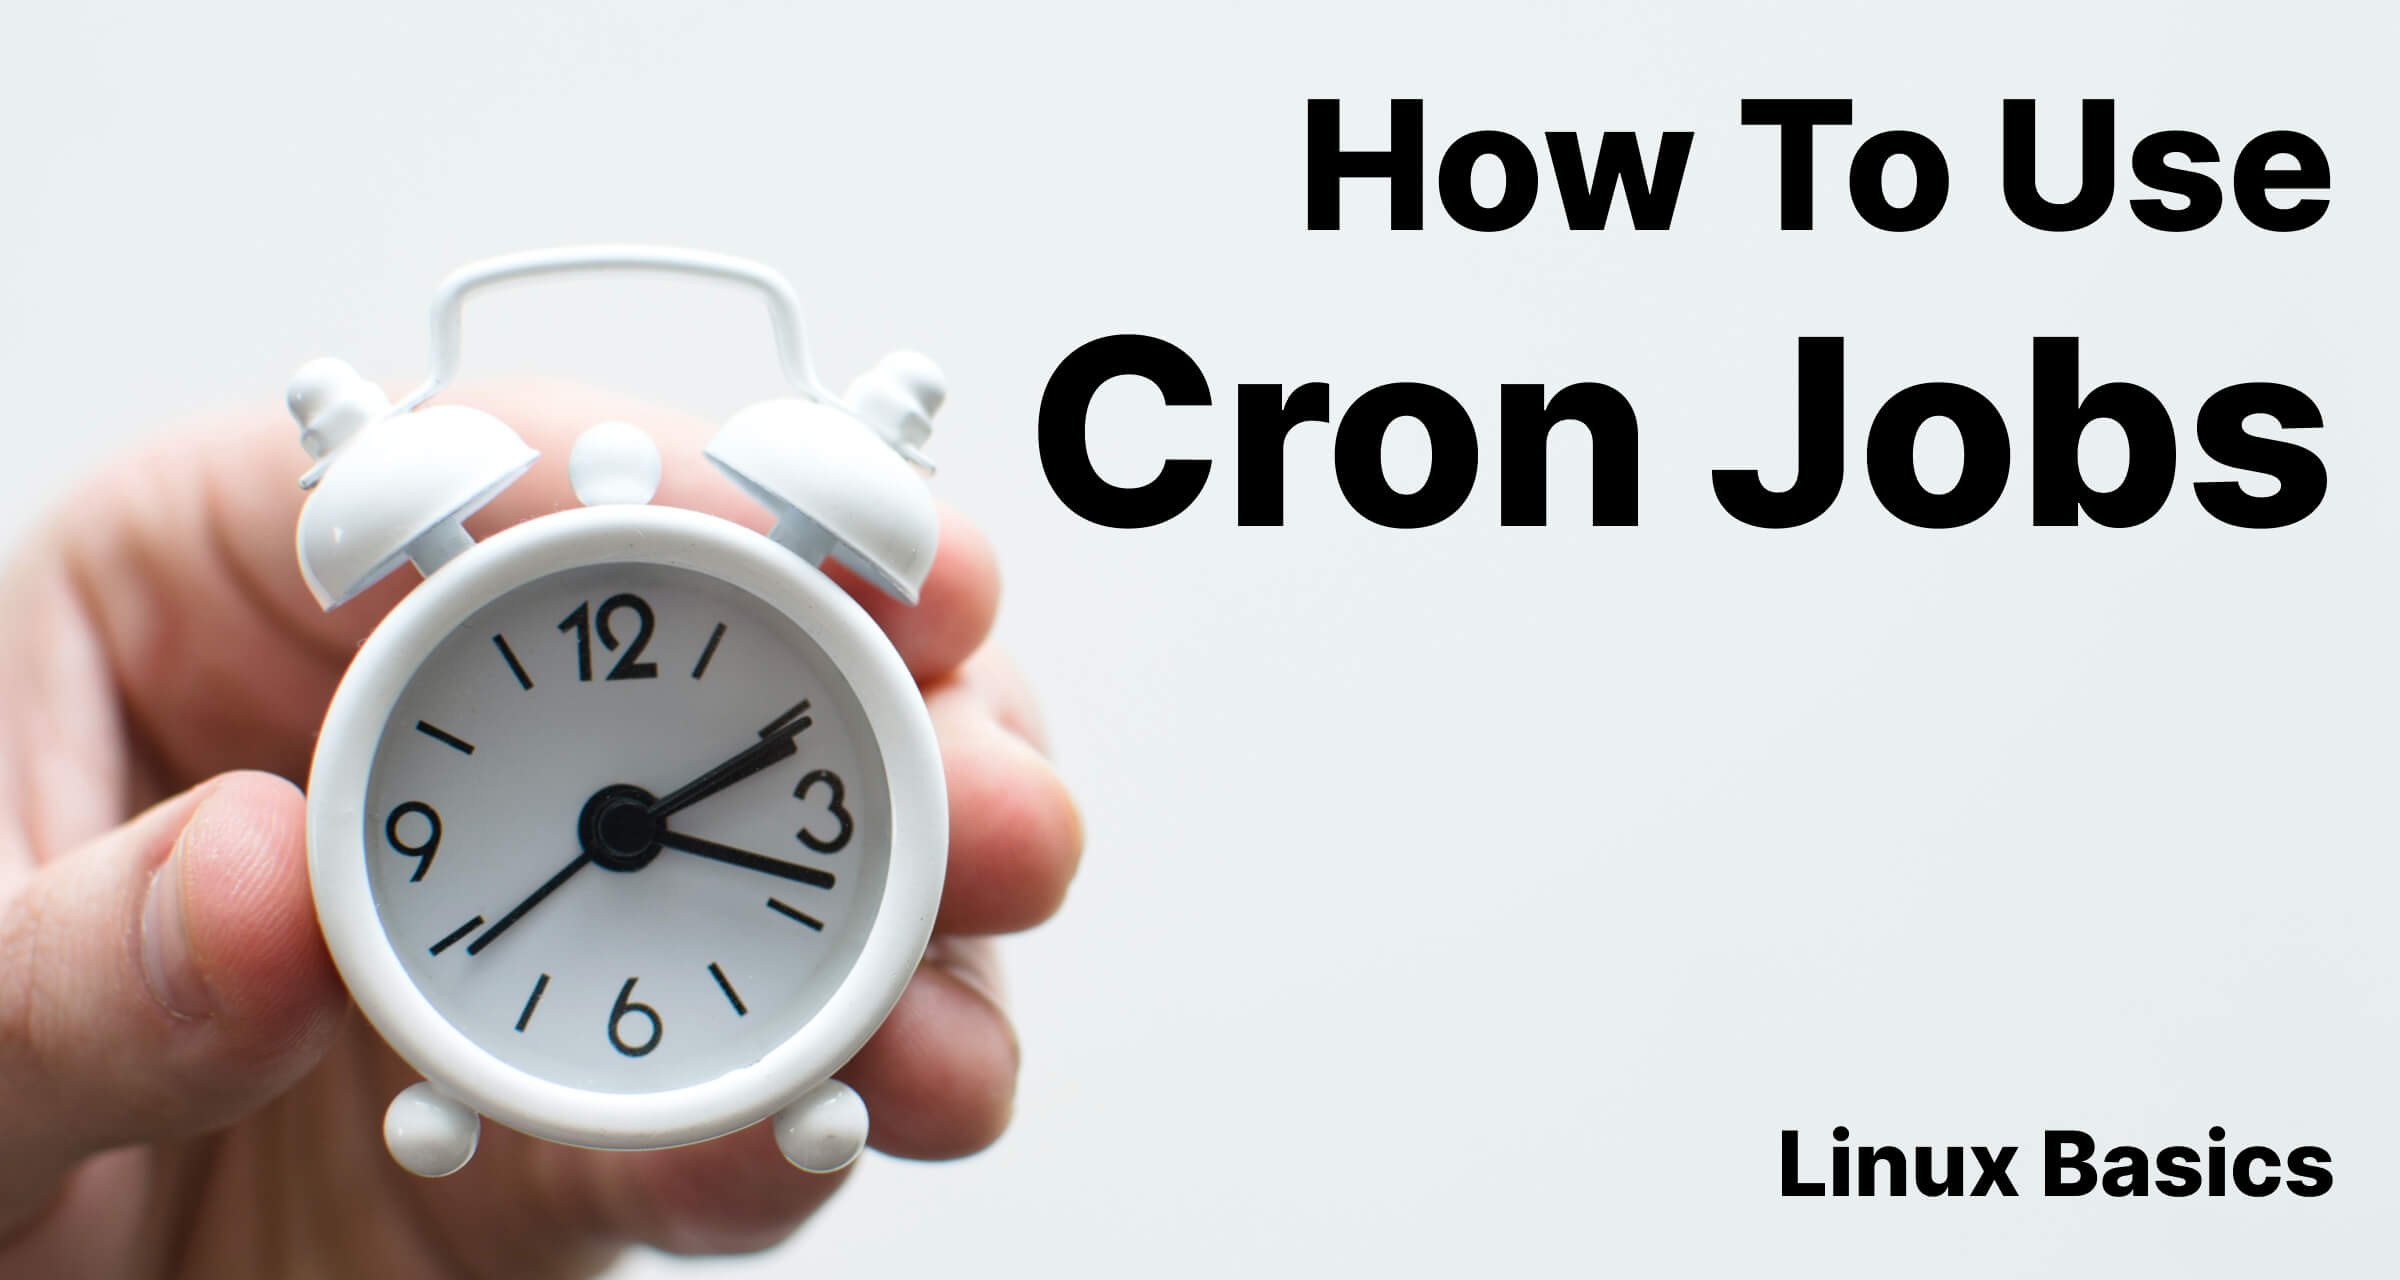 How to use Cron Jobs on Linux